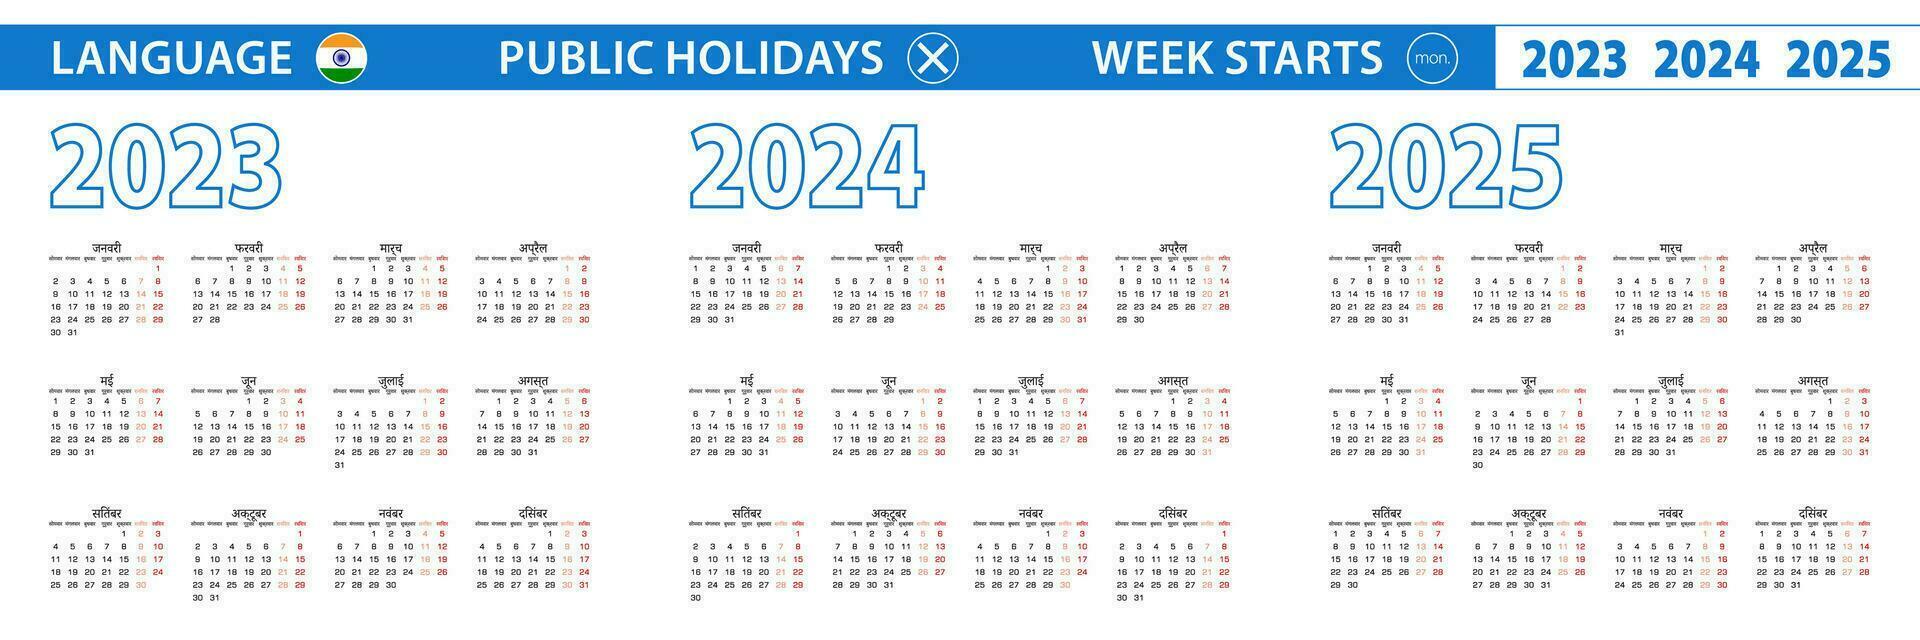 Simple calendar template in Hindi for 2023, 2024, 2025 years. Week starts from Monday. vector